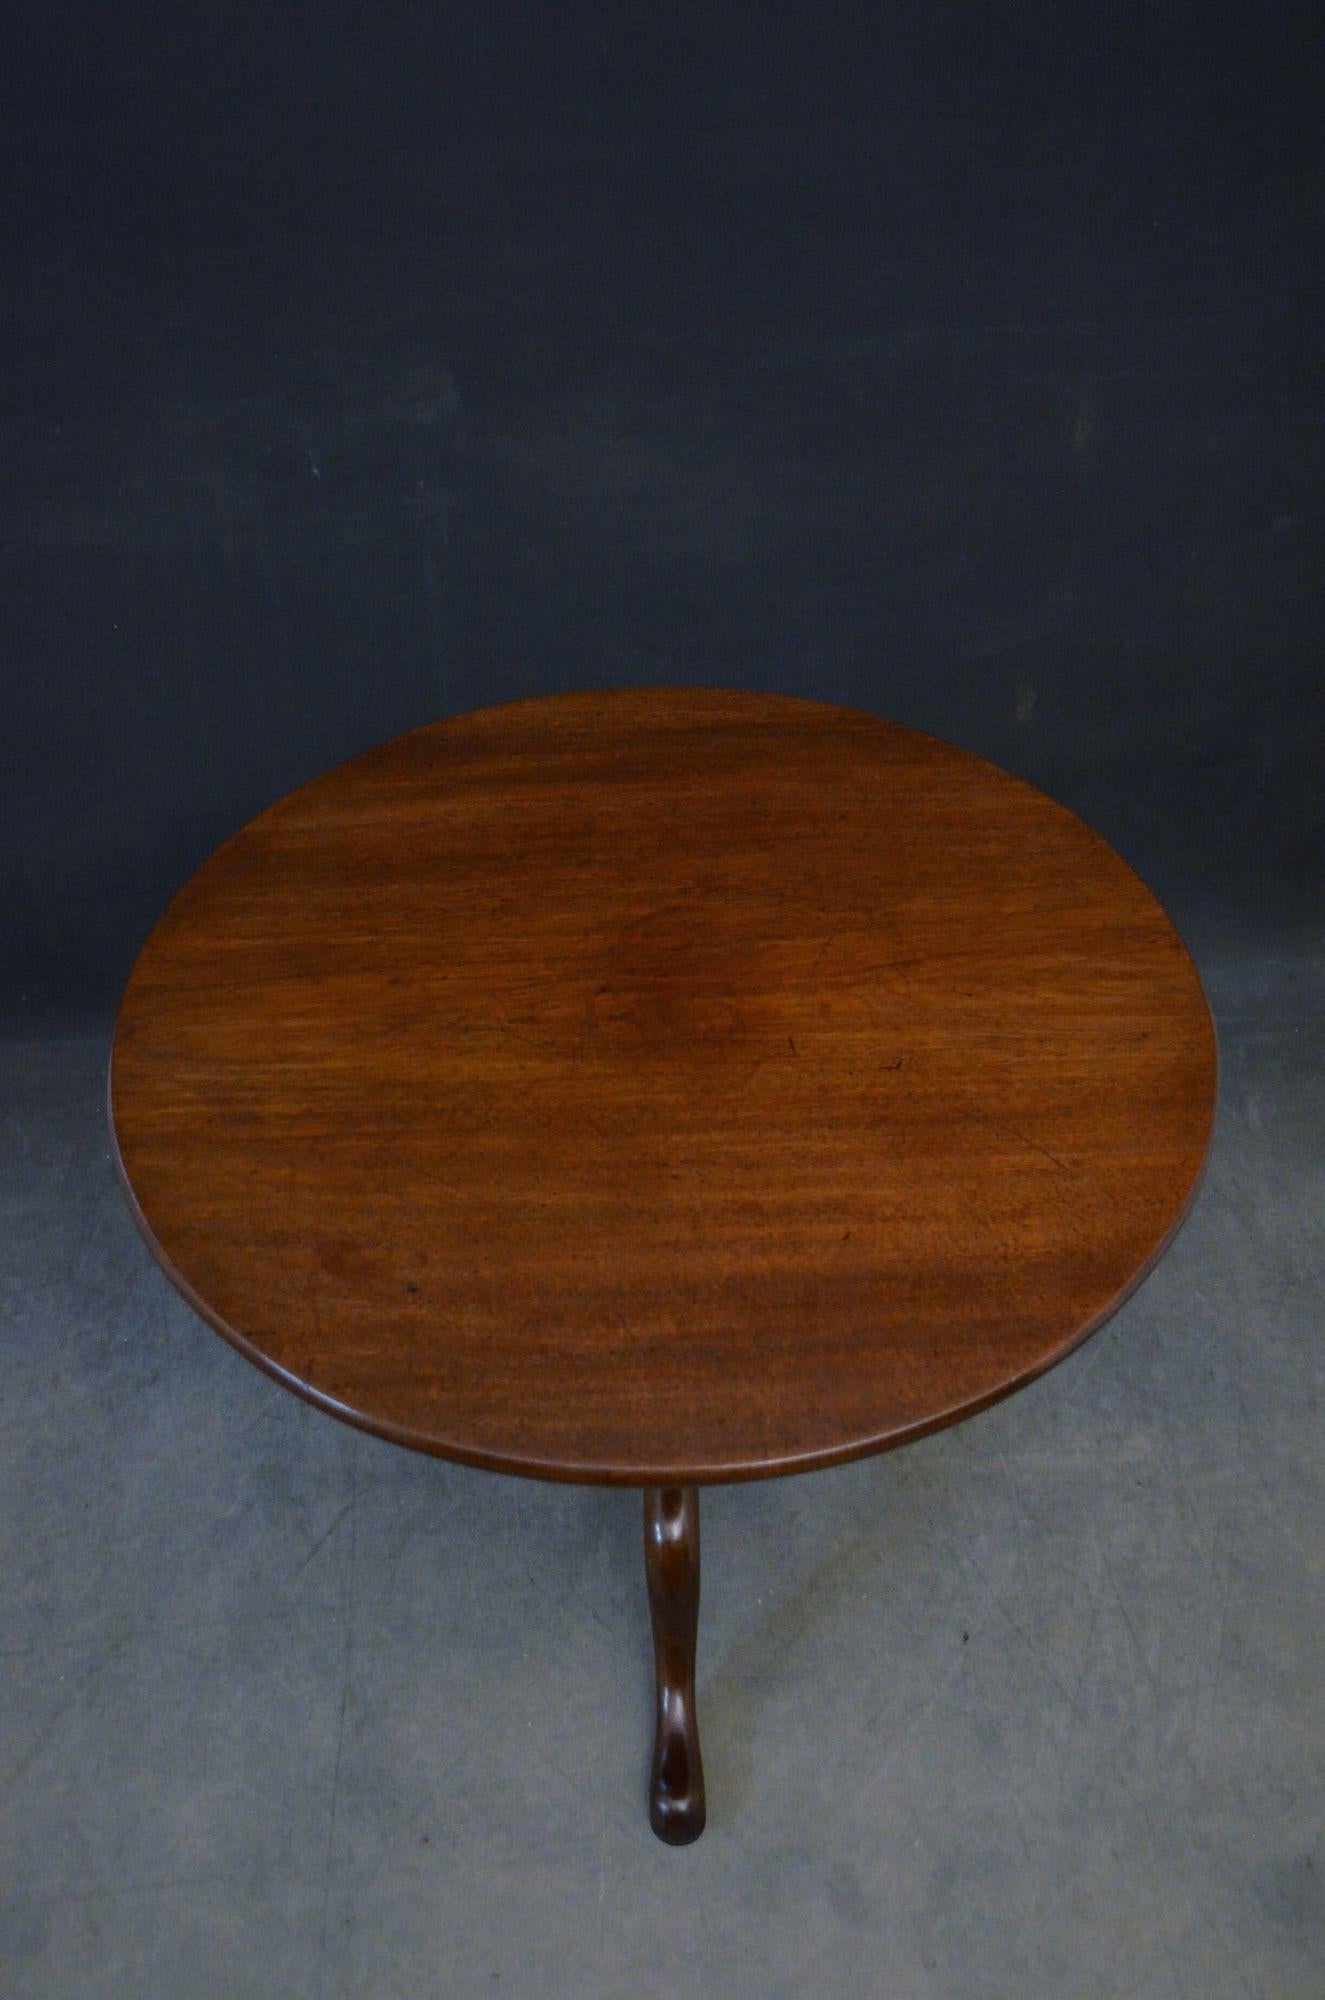 Sn5278 Fine quality George III tripod table, having single piece figured mahogany top on simple turned column terminating in 3 cabriole legs and pad feet. This antique table retains its original finish which has been revived and waxed, soft colour